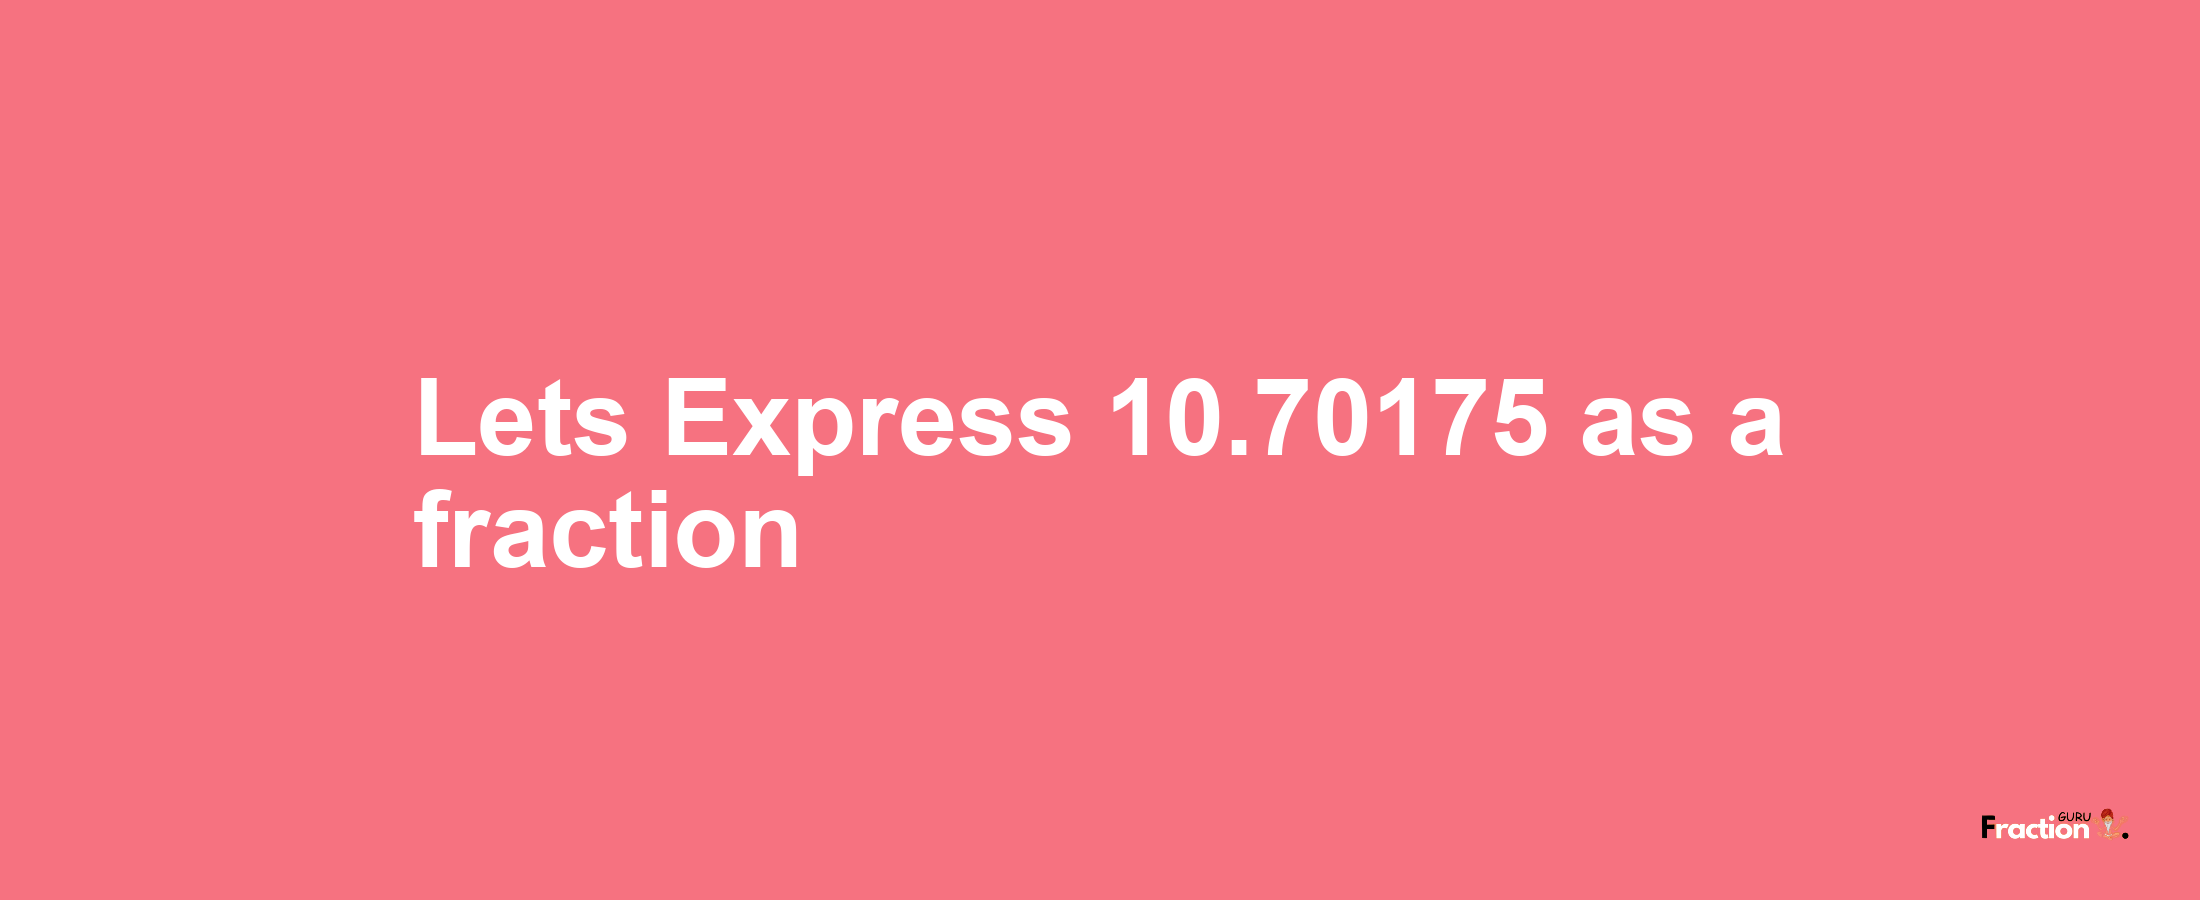 Lets Express 10.70175 as afraction